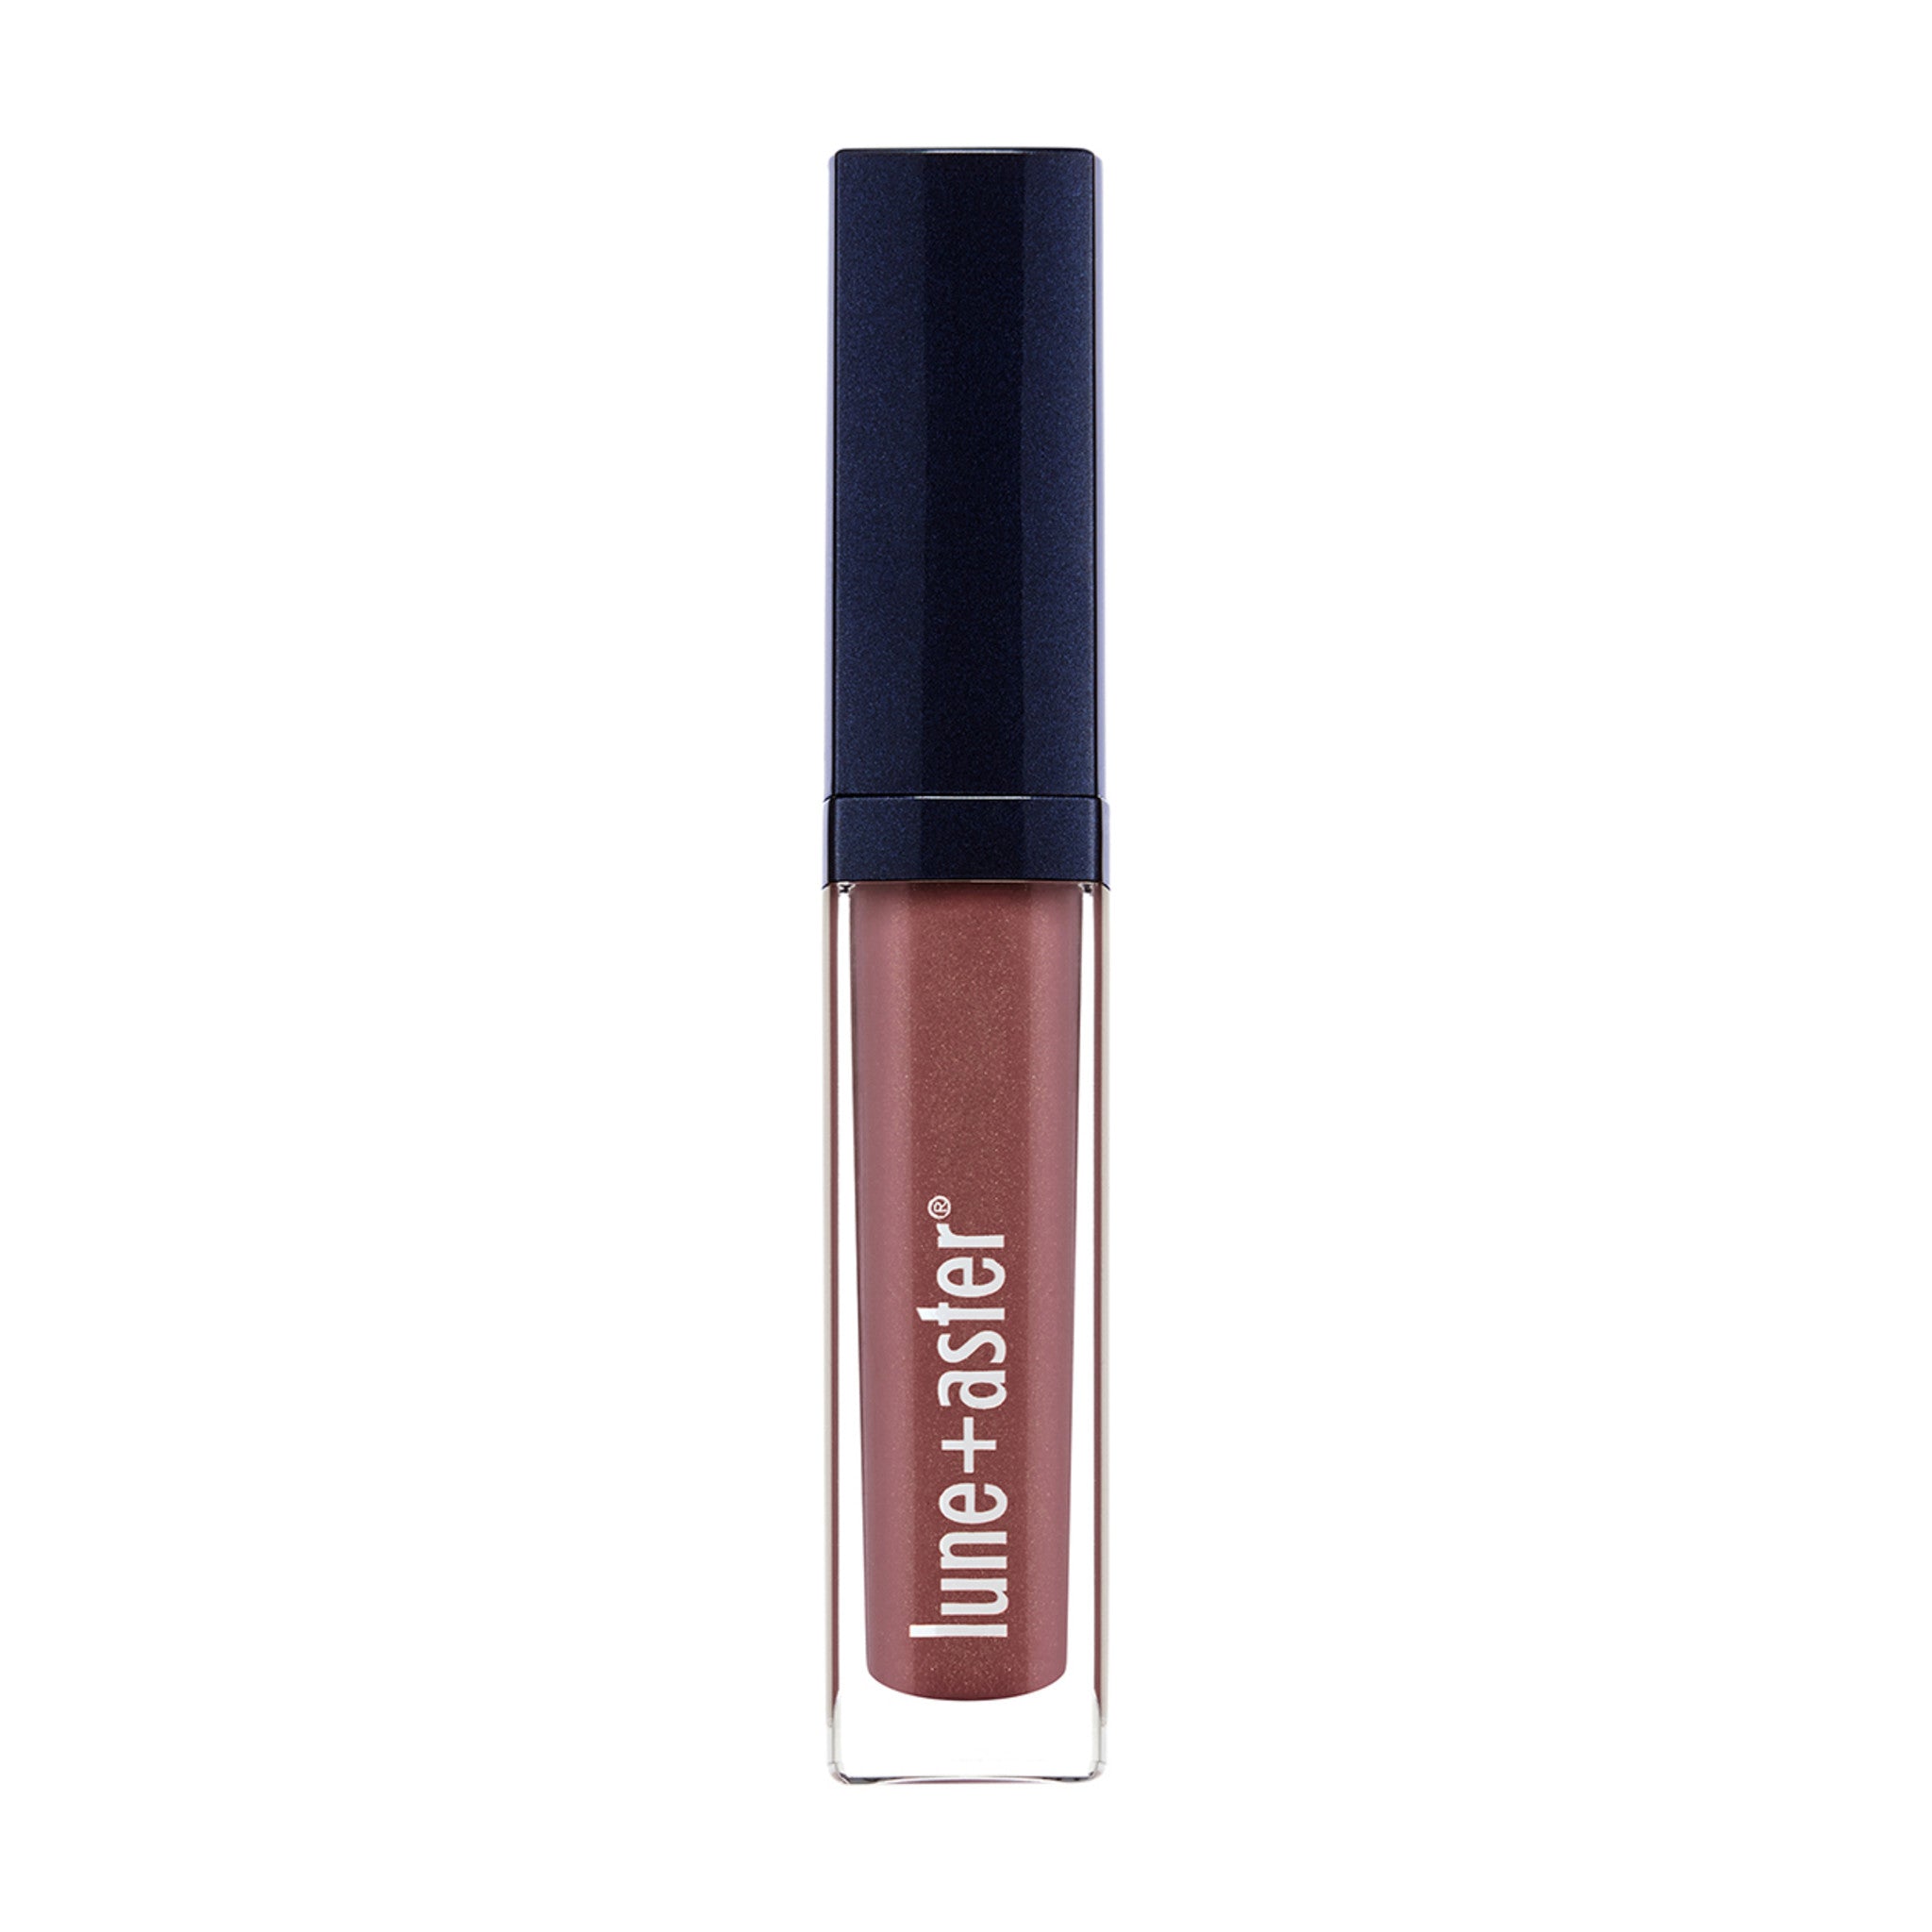 Lune+Aster Vitamin C+E Lip Gloss Color/Shade variant: Activist main image. This product is in the color nude